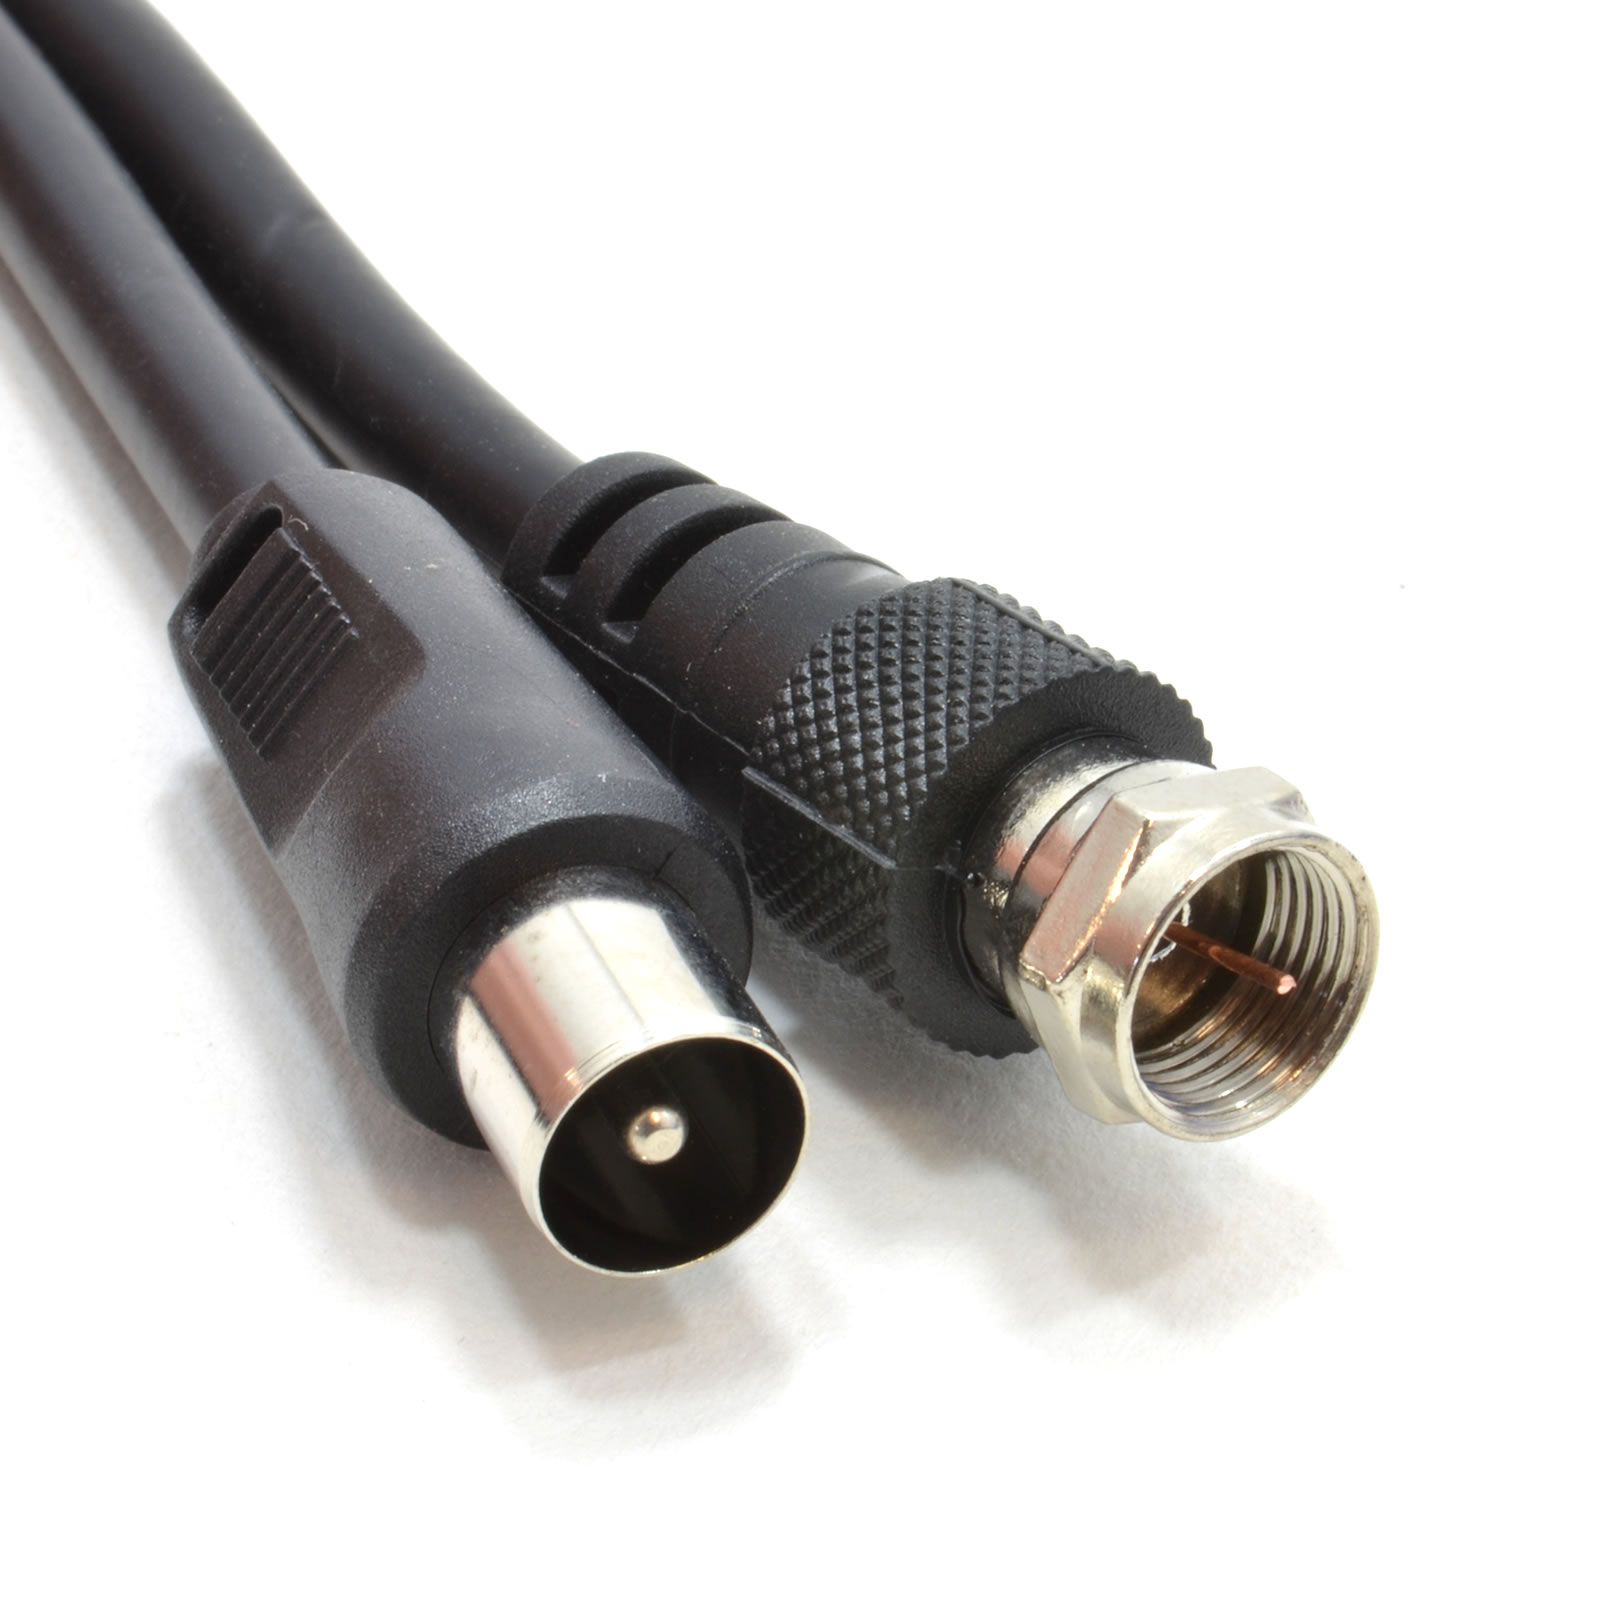 Coaxial F Connector Male Plug to RF Male Plug RG59 Cable 1.5m Black ...